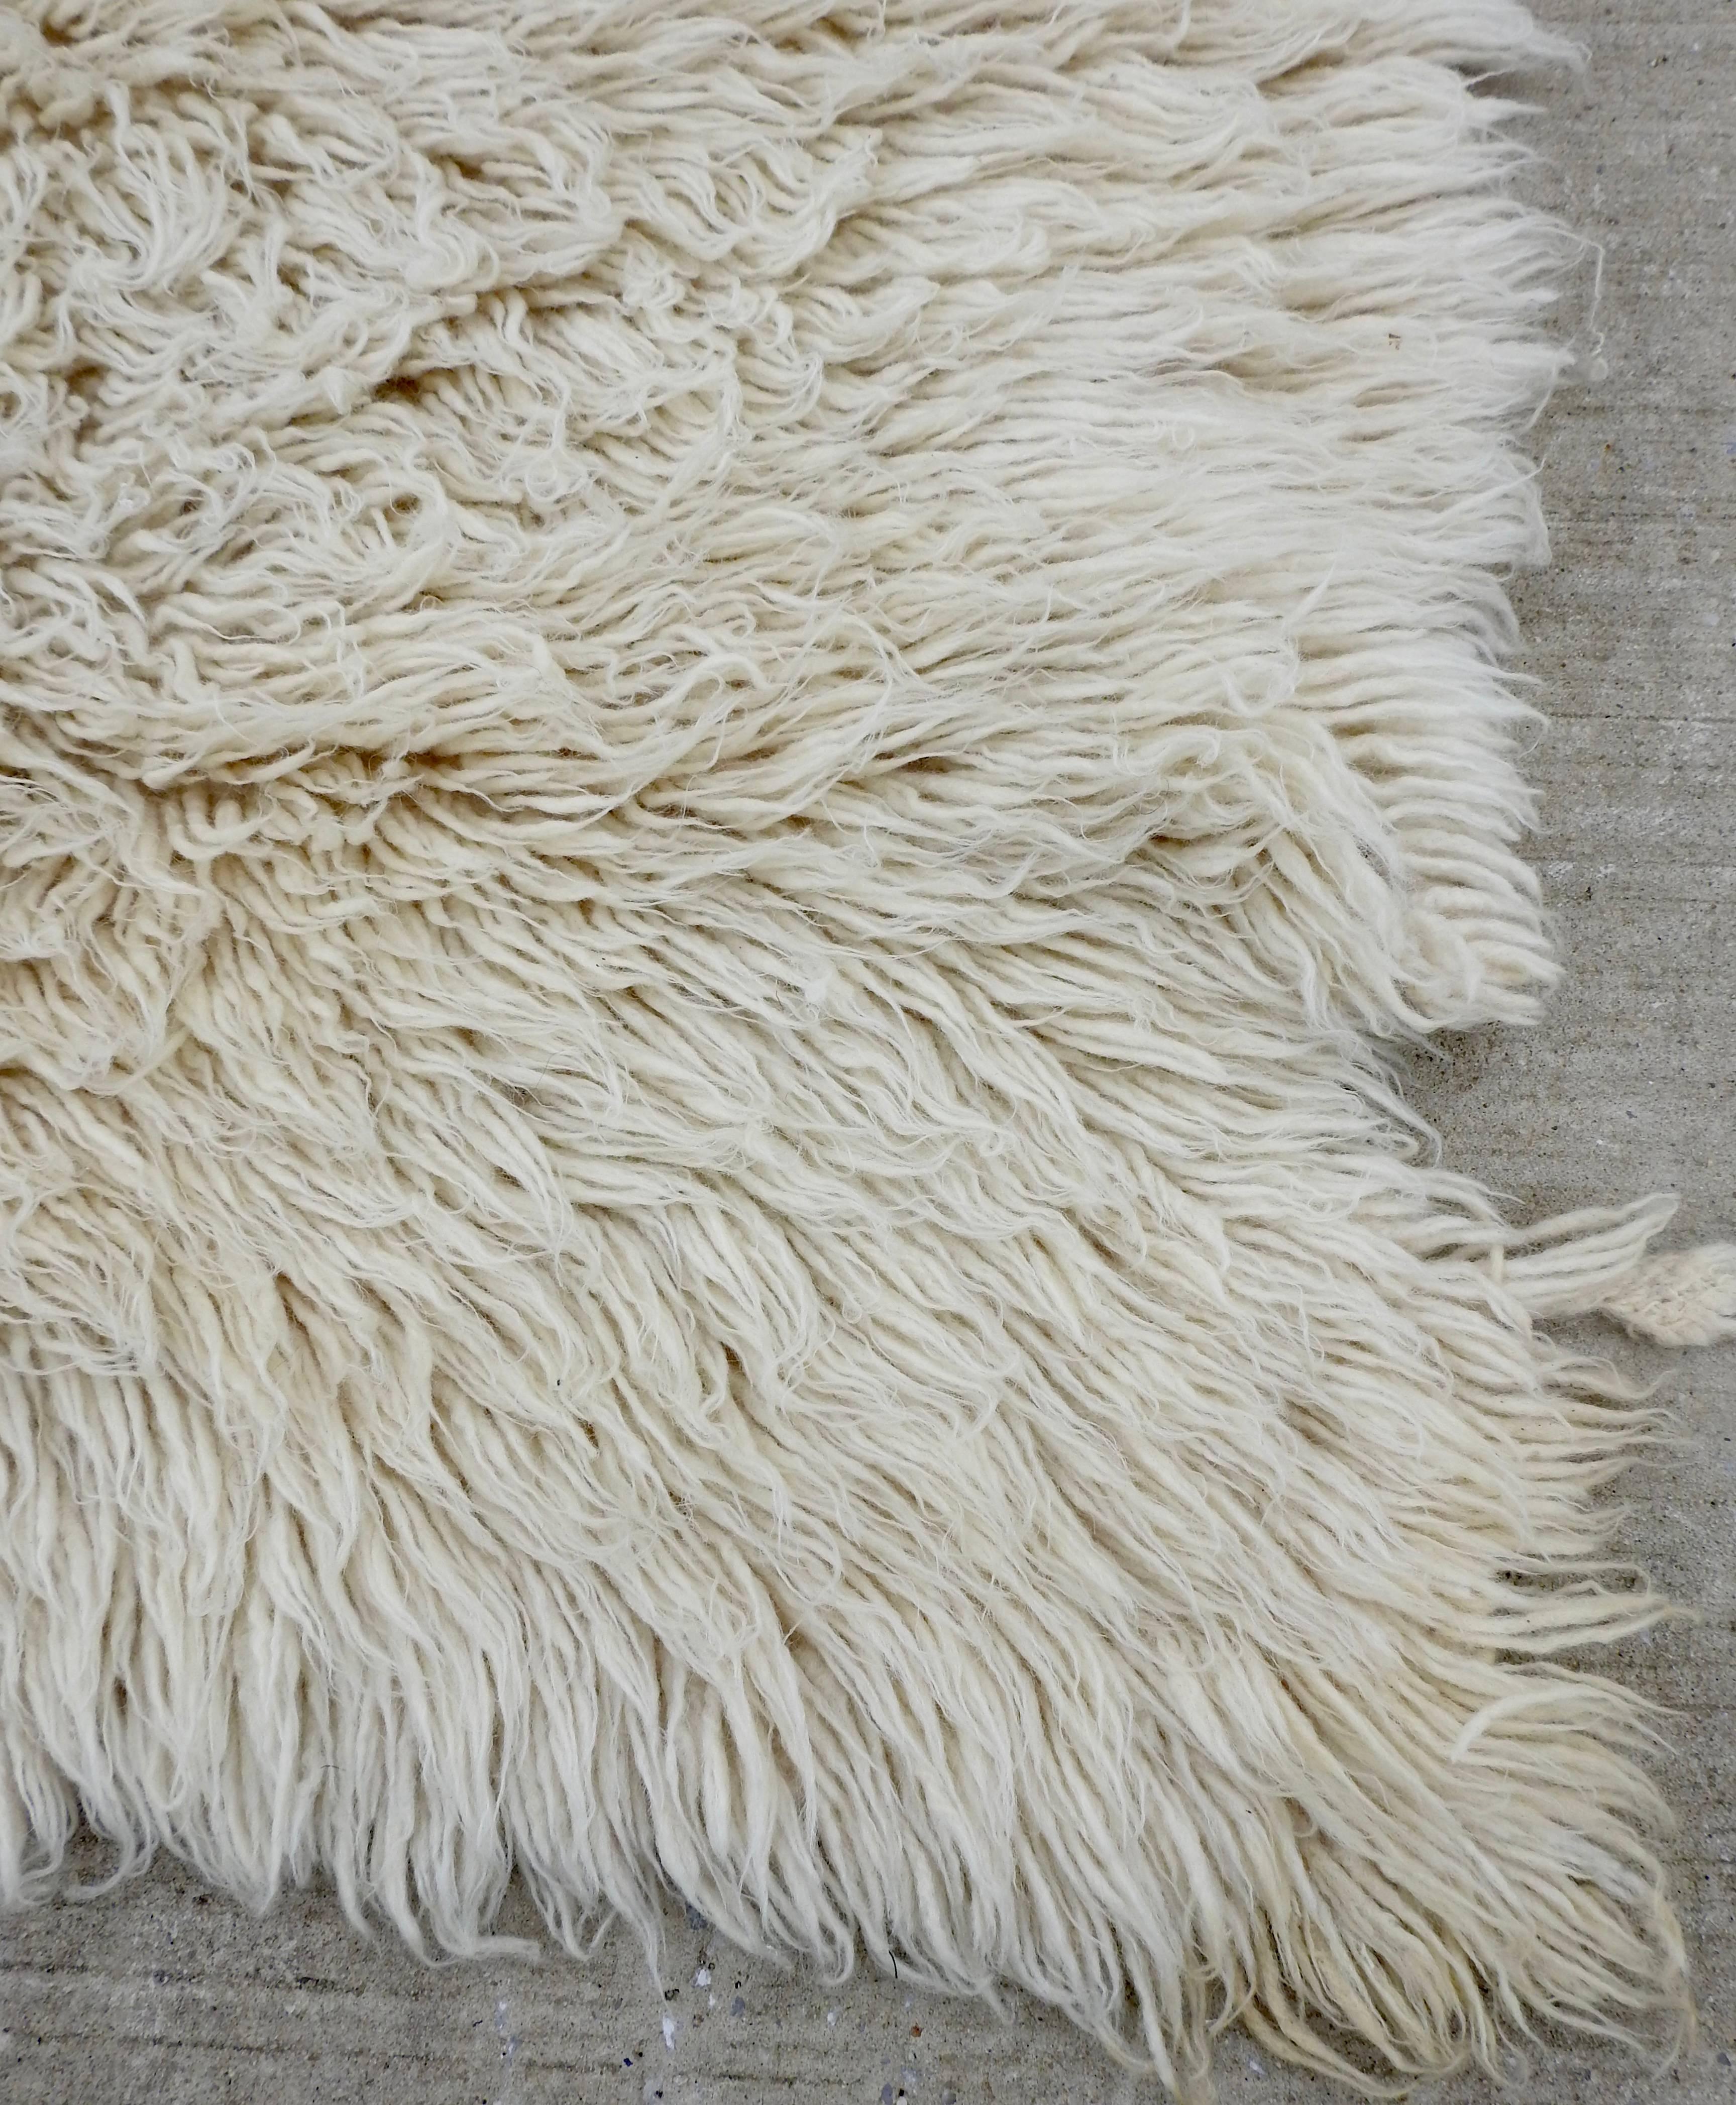 Natural fibers complete this wool Flokati rug from the midcentury era. These handmade rugs were produced for daily use by villagers around Karapinar in Central Anatolia. The rug has been hand knotted. This style of rug has a Minimalist look and is